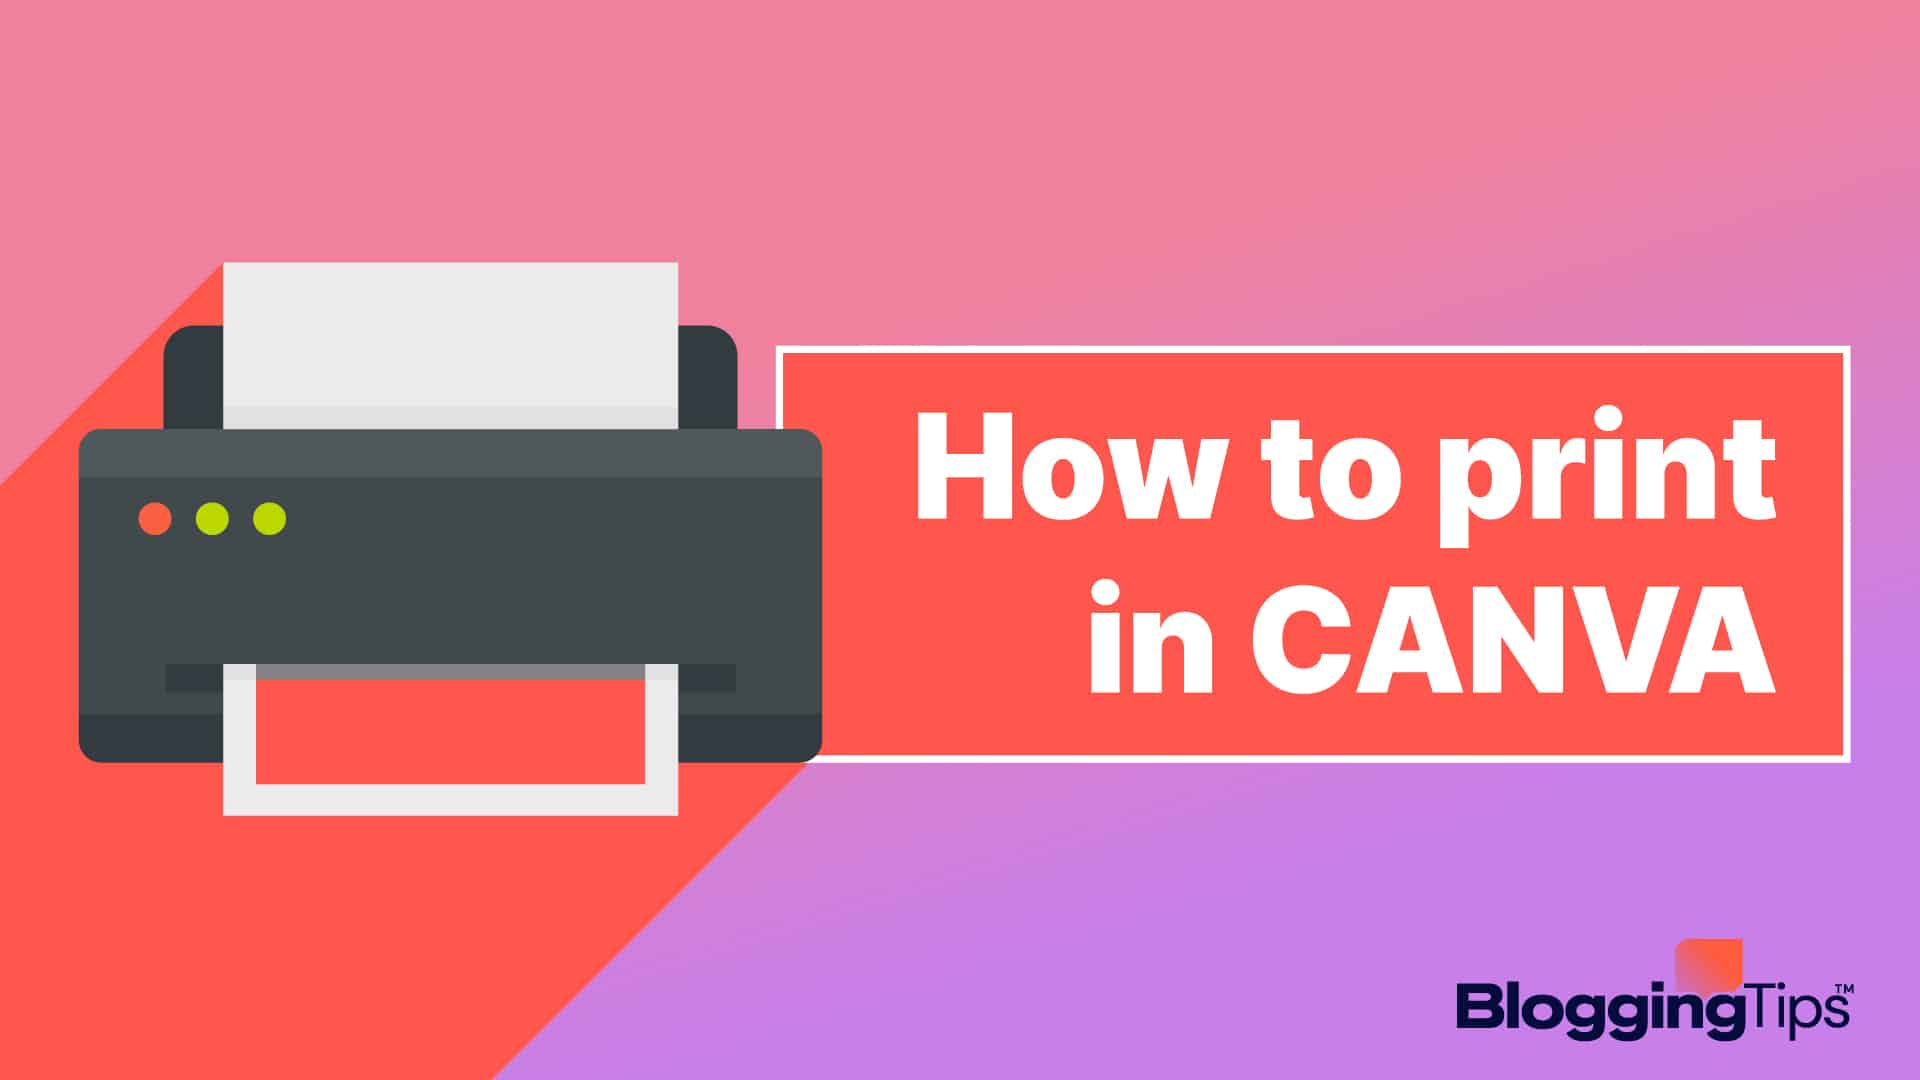 how-to-print-in-canva-using-8-simple-steps-bloggingtips